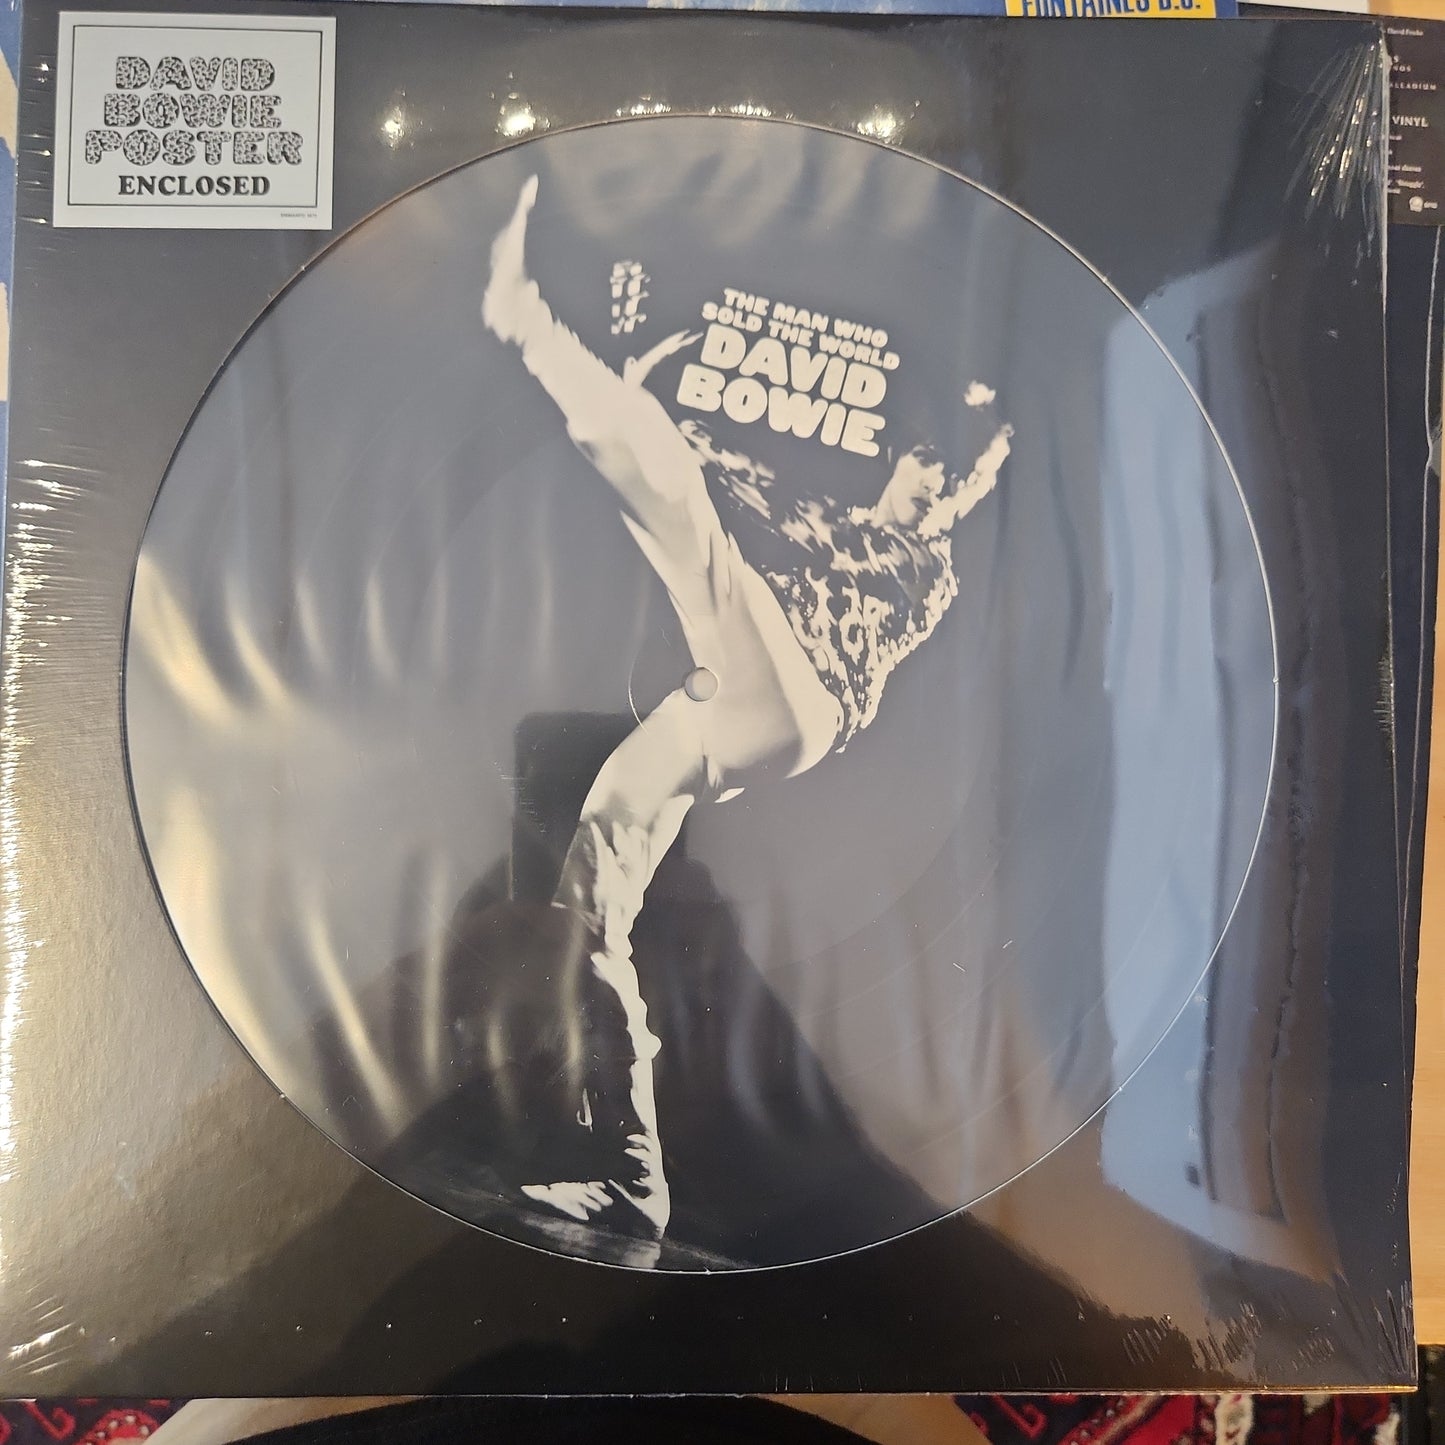 David Bowie - The Man who sold the world - Picture Disc Vinyl LP